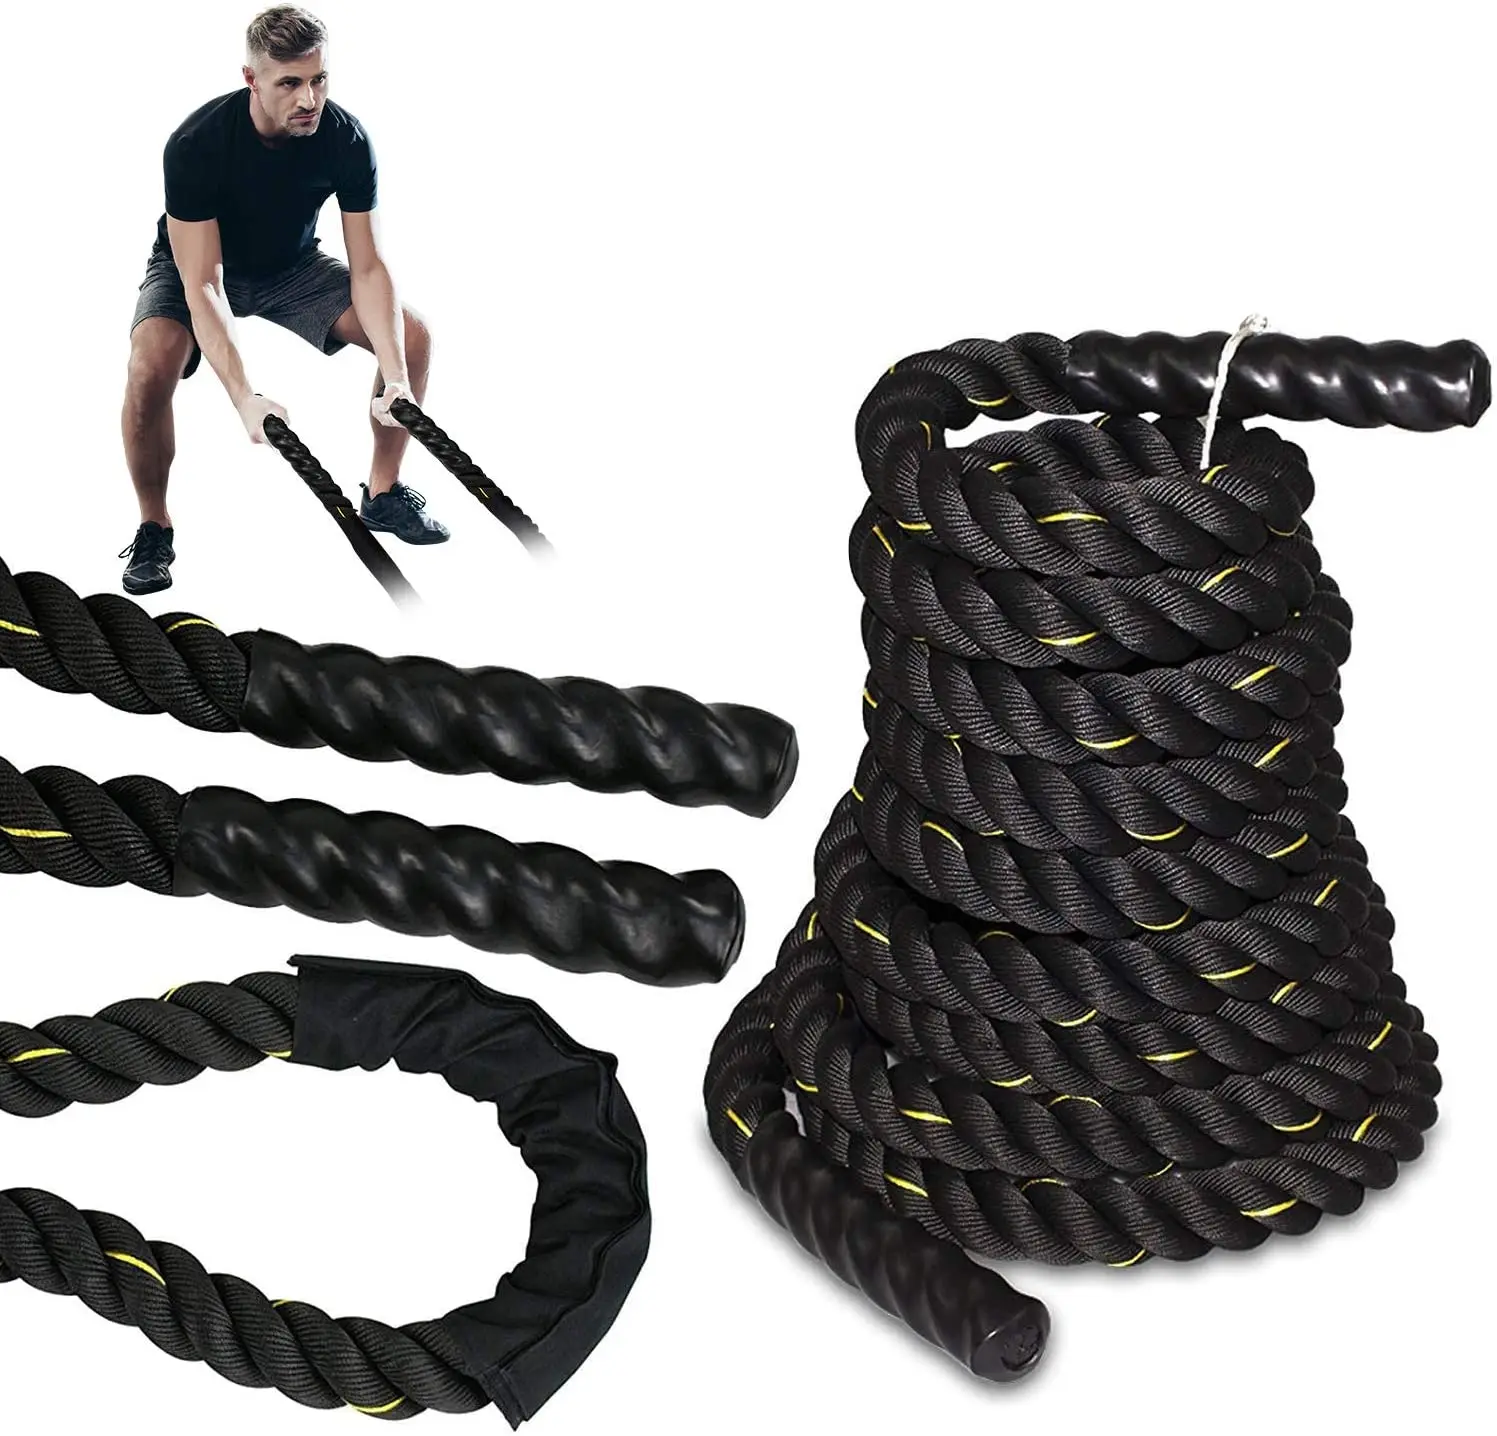 

Power Strength Heavy Strong Hot Battle Ropes Fitness Workouts Building Muscle Power Training Workout Battle Ropes Gym Machines, Selectivity